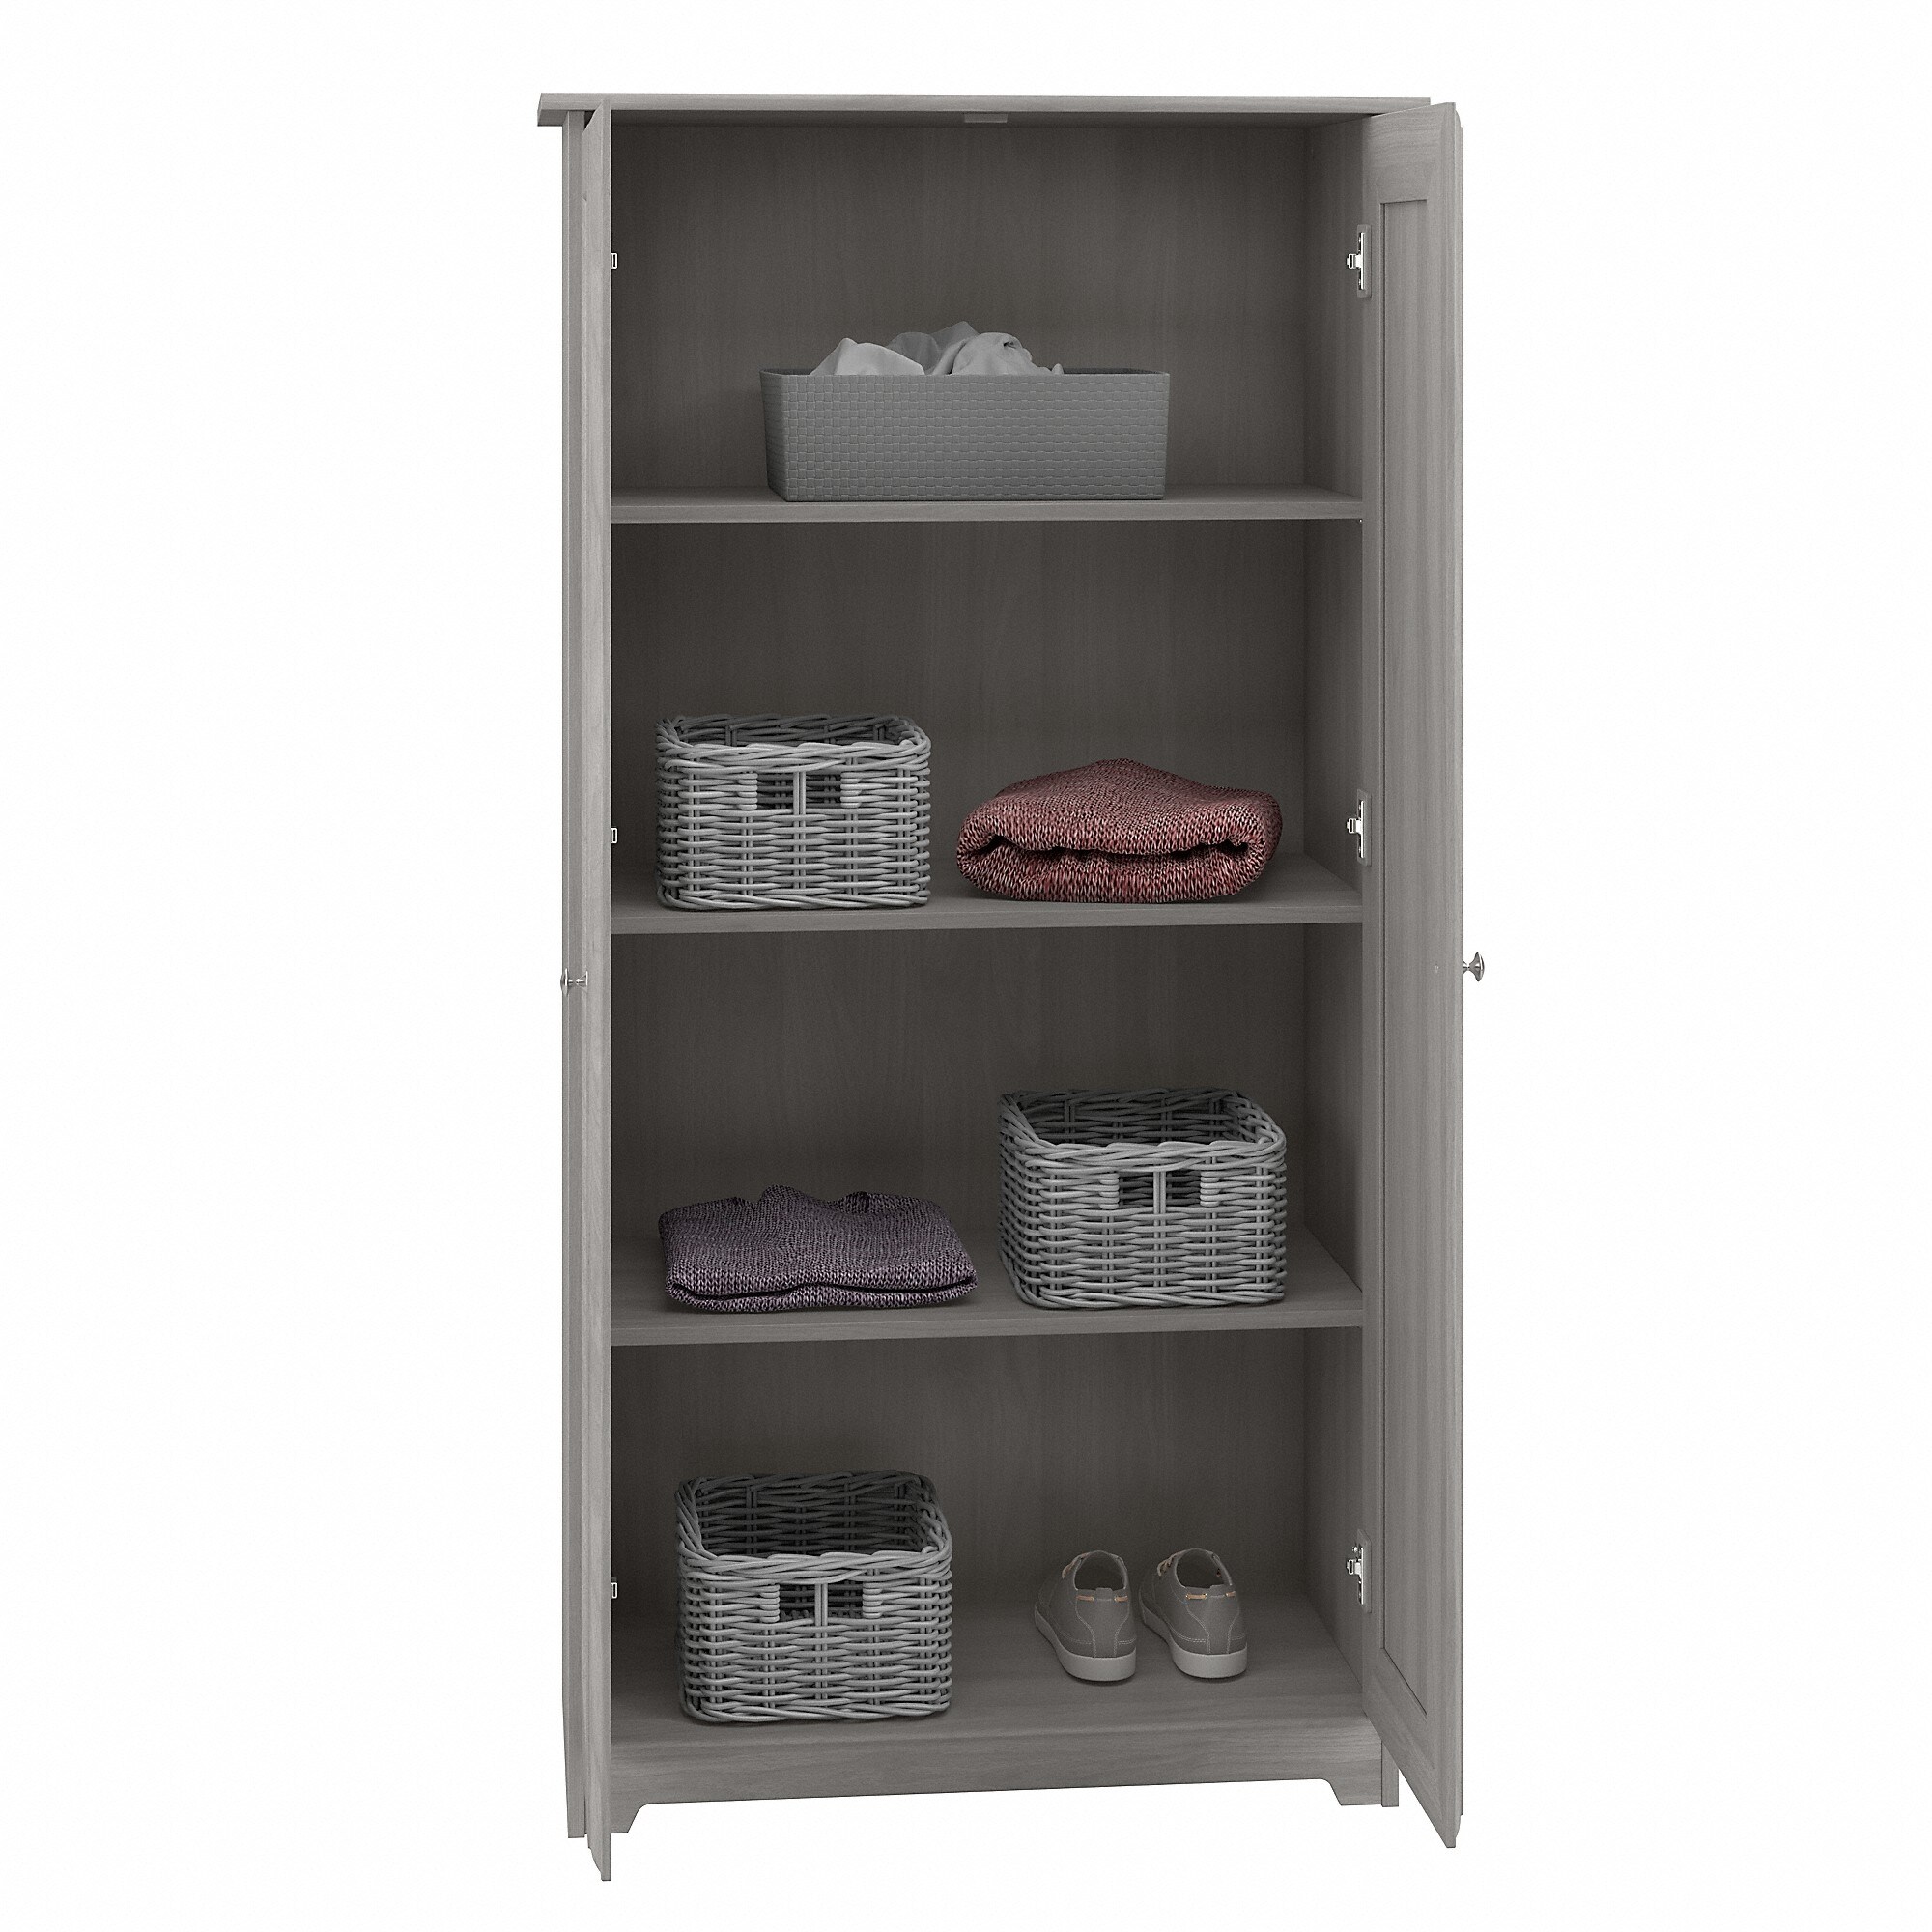 Bush Furniture Cabot Small Storage Cabinet with Doors - On Sale - Bed Bath  & Beyond - 35808869